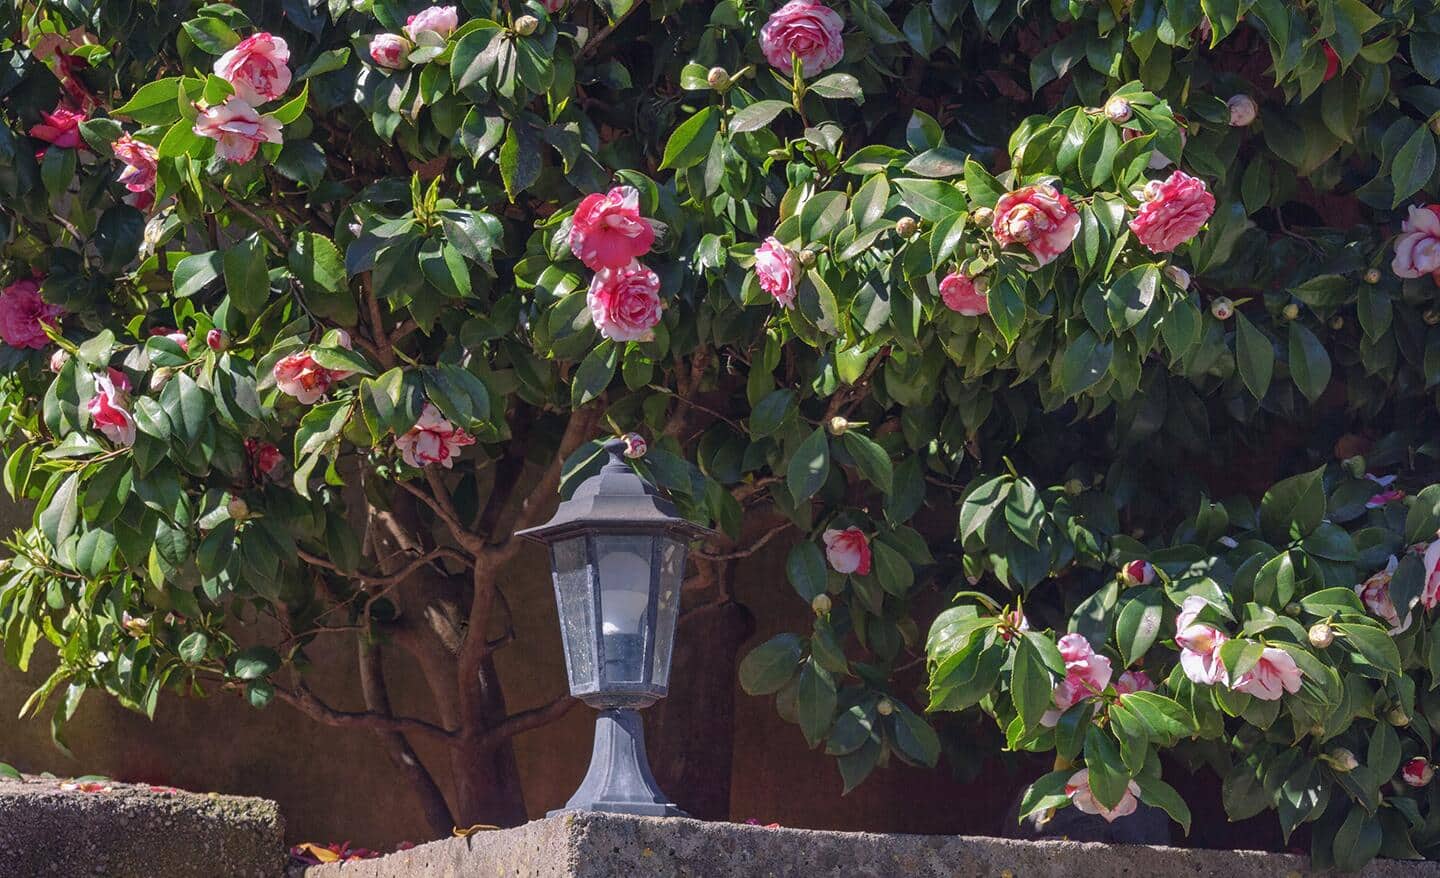 Camellia shrub with pink flowers in a garden